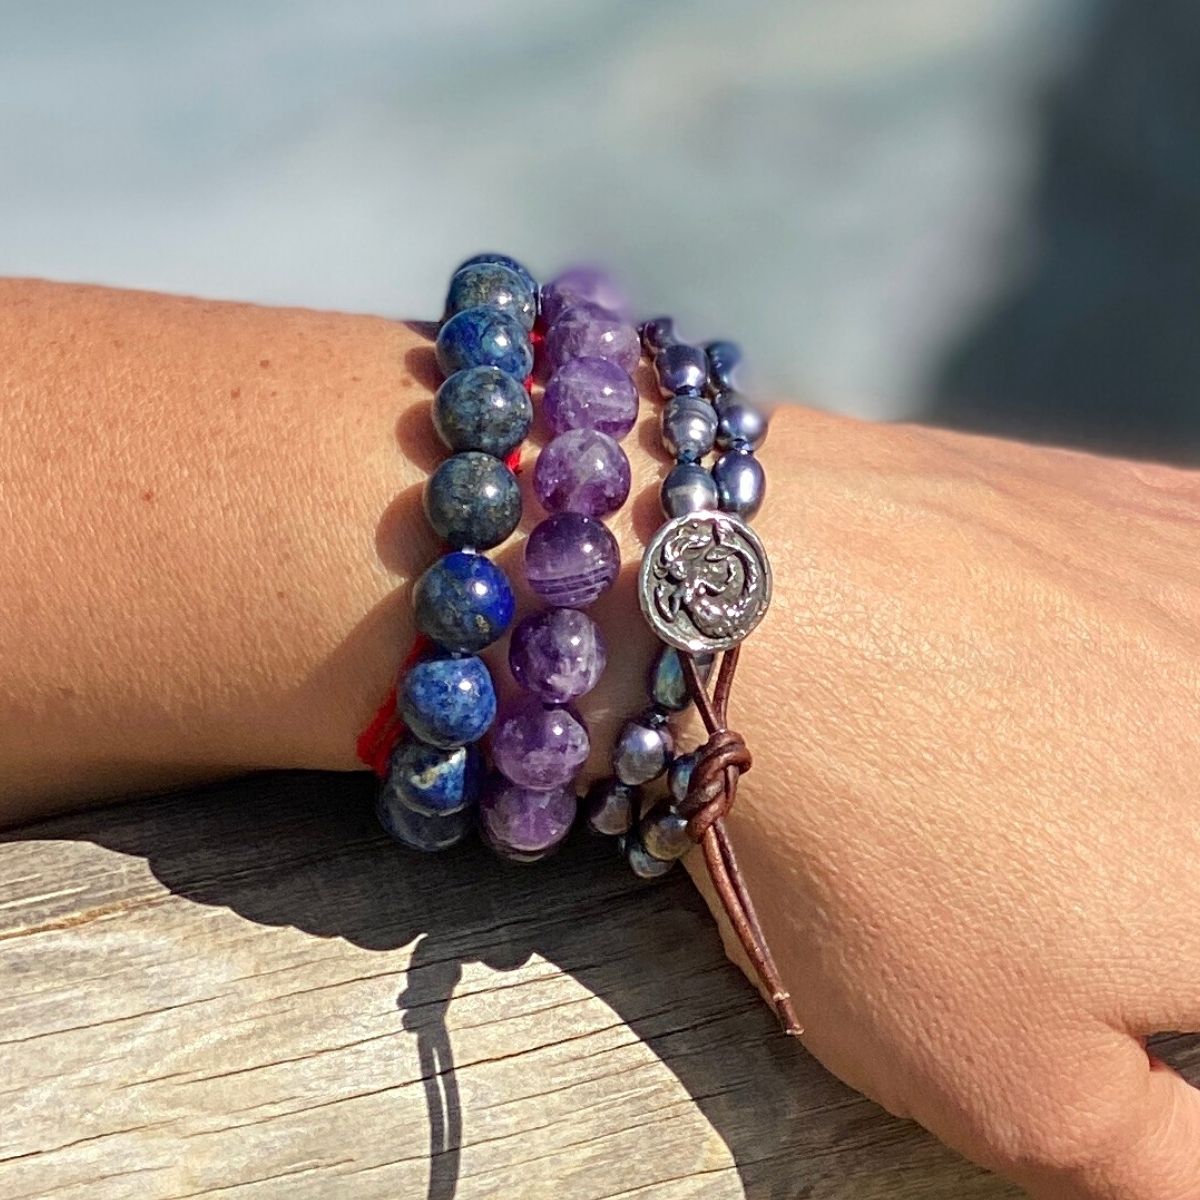 Do you have a free spirit and a happy heart? If you believe in yourself and trust your soul, you can achieve all of your dreams. This Free Spirit Bracelet Stack is the reflection of that feeling.